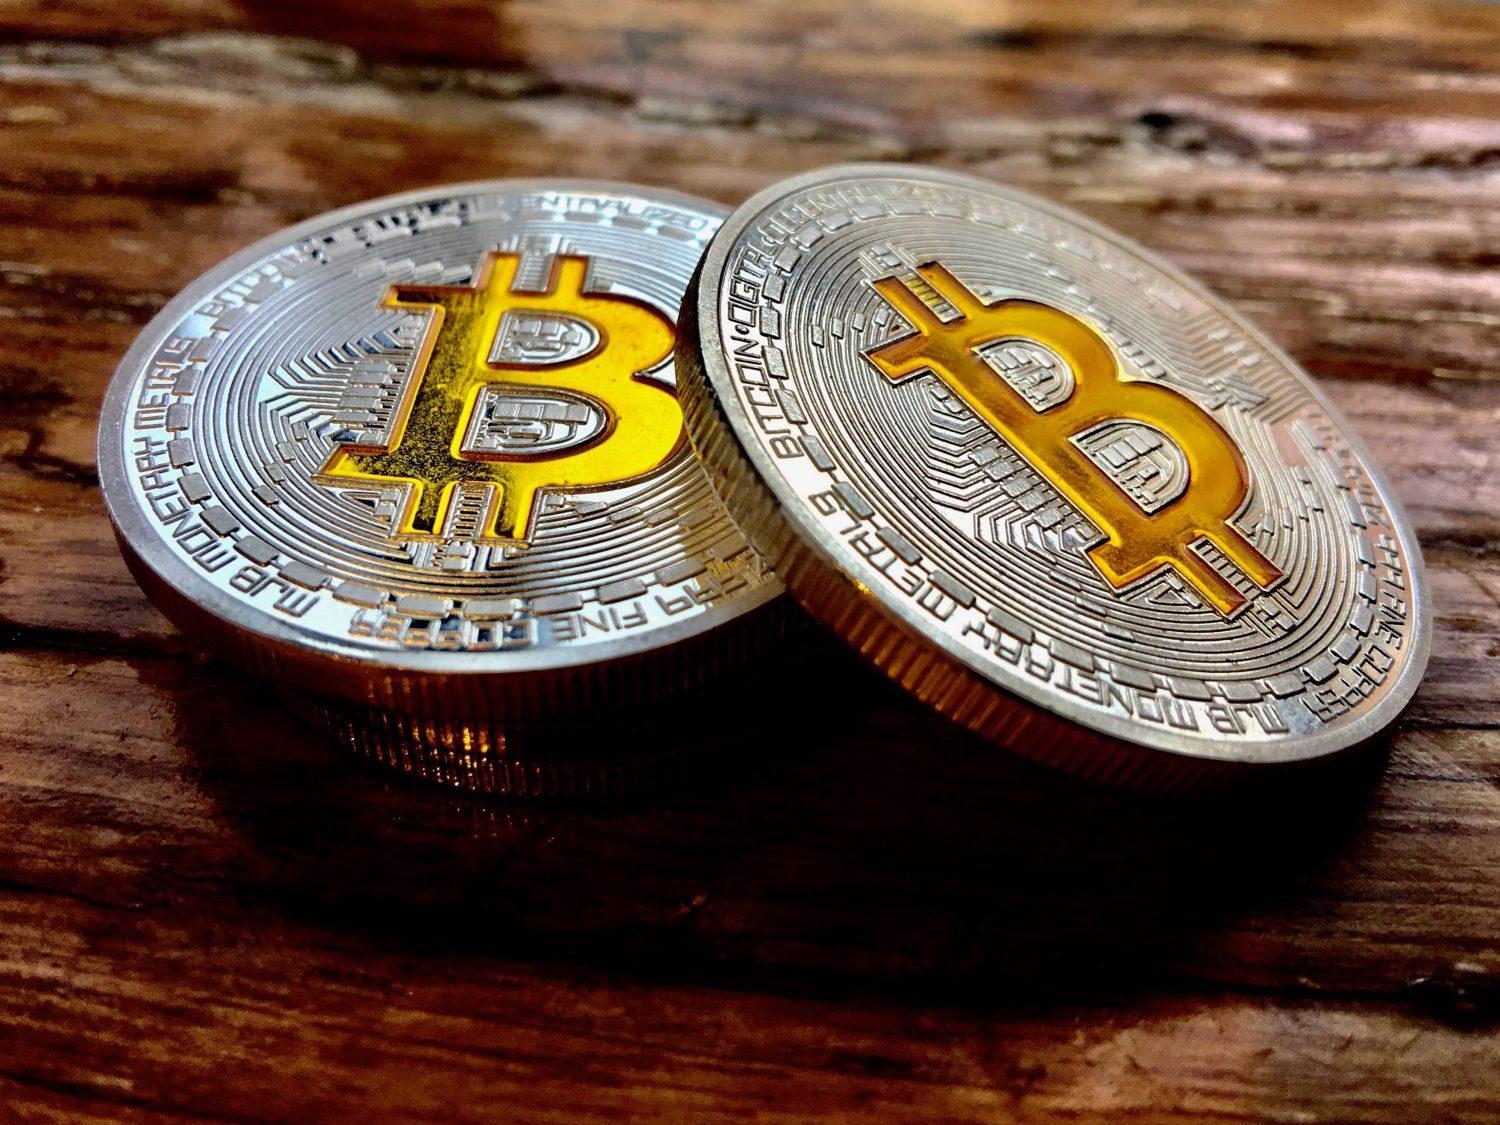 Bitcoin is a digital currency developed in 2008 by someone who used the pseudonym 'Satoshi Nakamoto' and bitcoin can be purchased using your own money or credit cards. (Photo Credit: Synerio Blog)